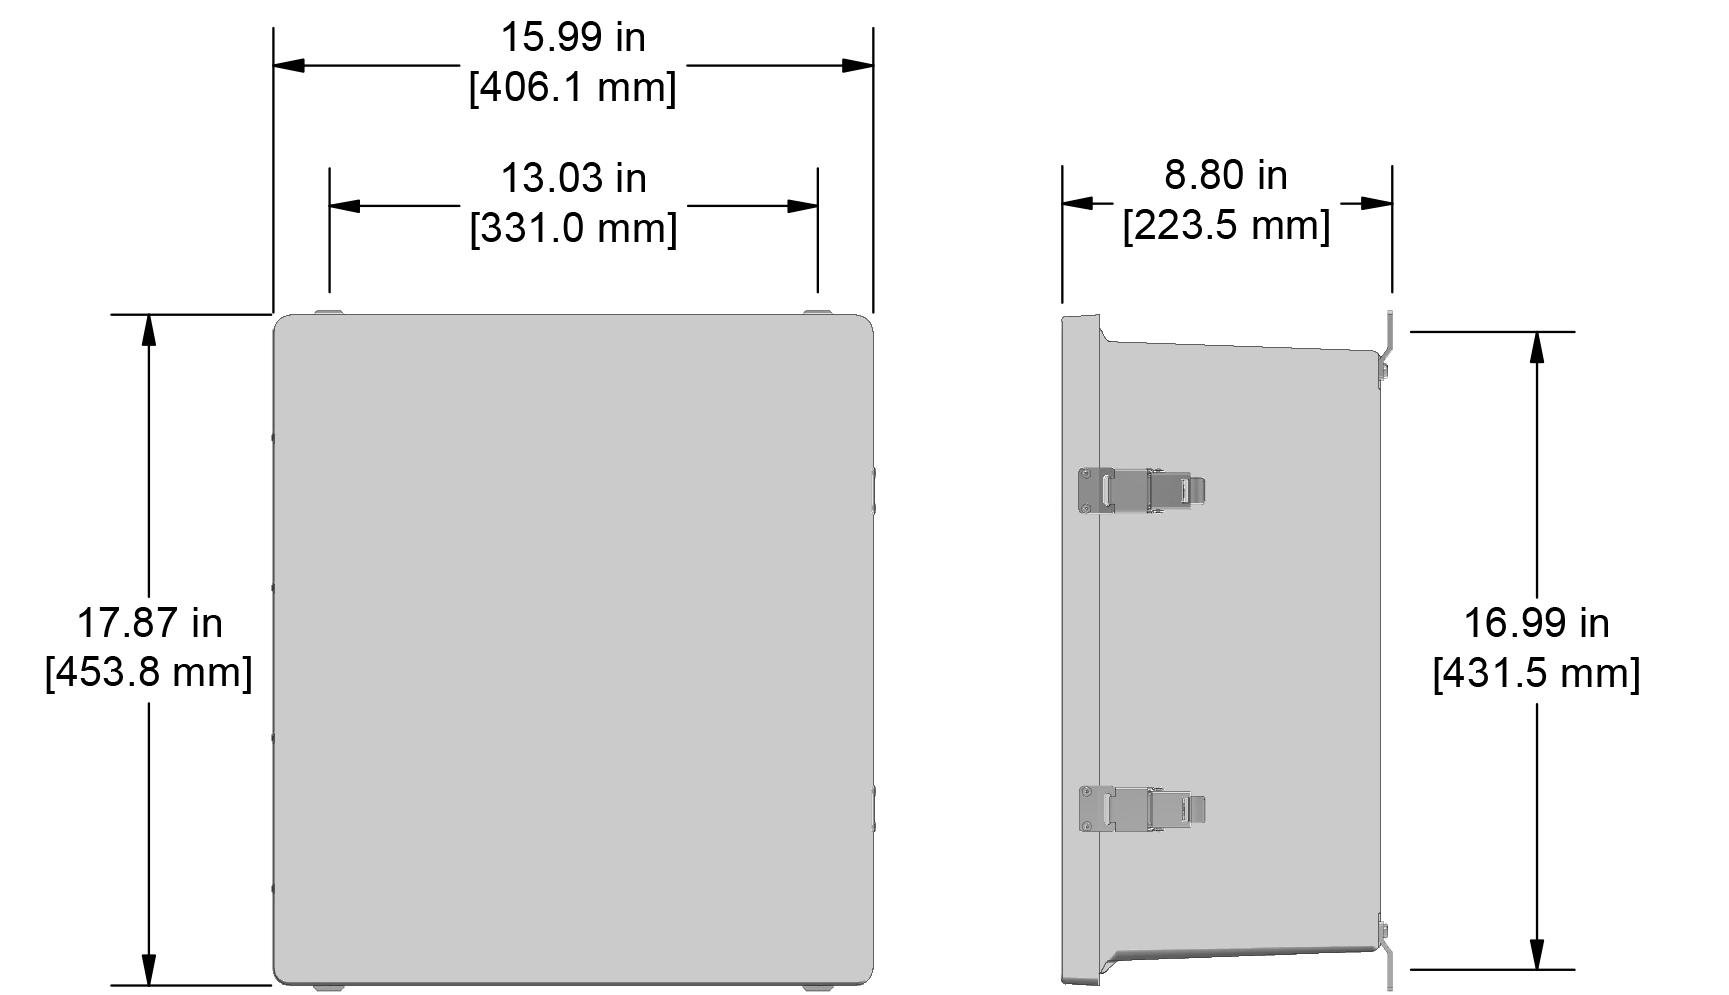 A drawing showing the dimensions of a CTC PXE350 Extended Capacity industrial enclosure.